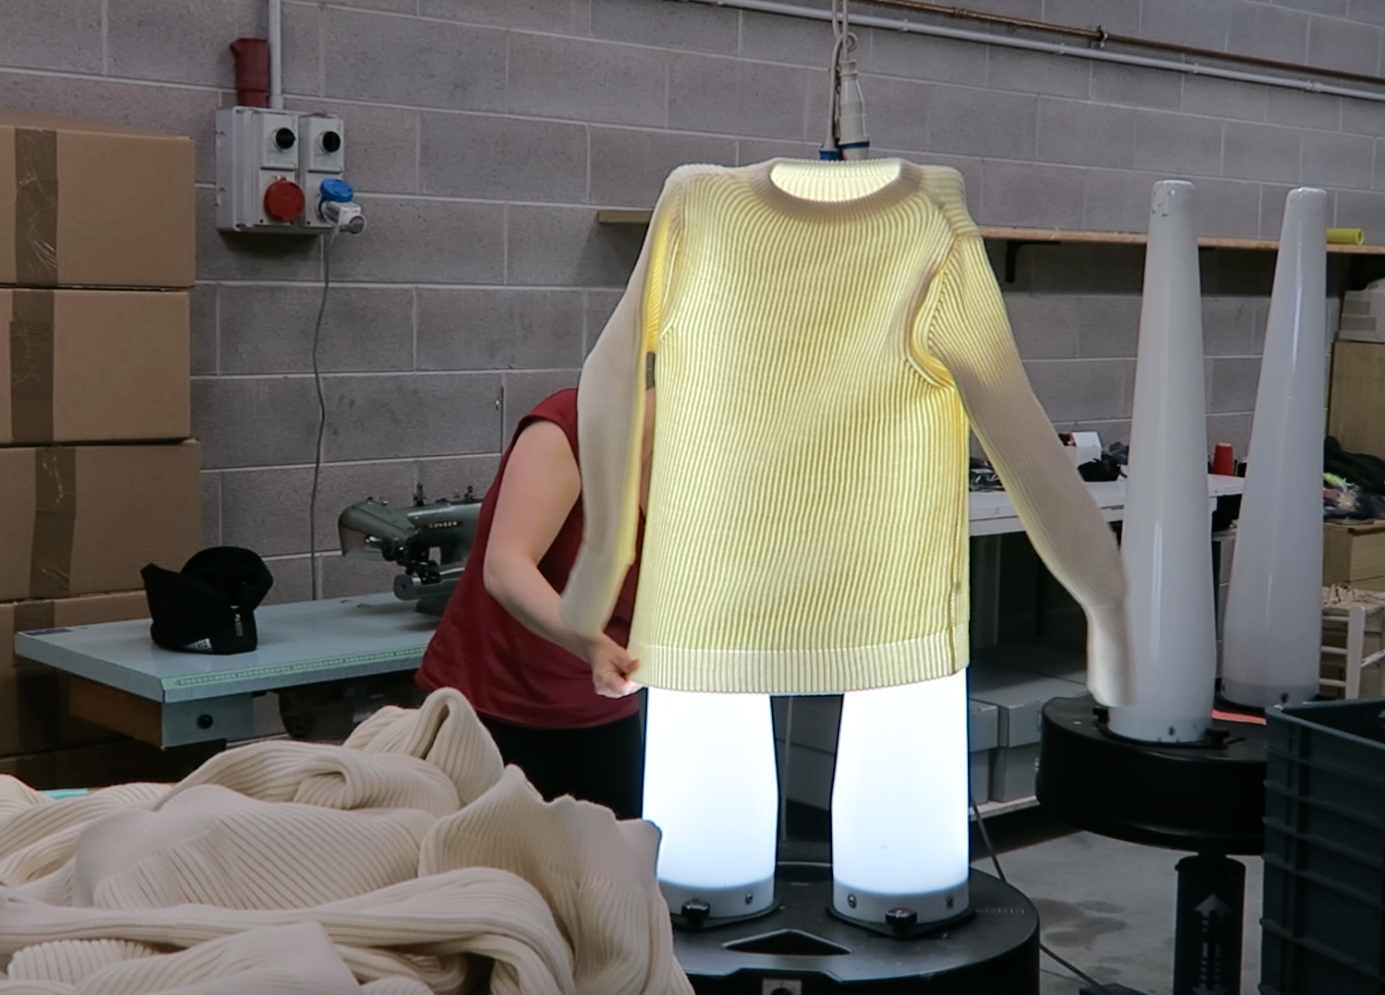 Light testing garments to make sure all is knitted and linked to standards